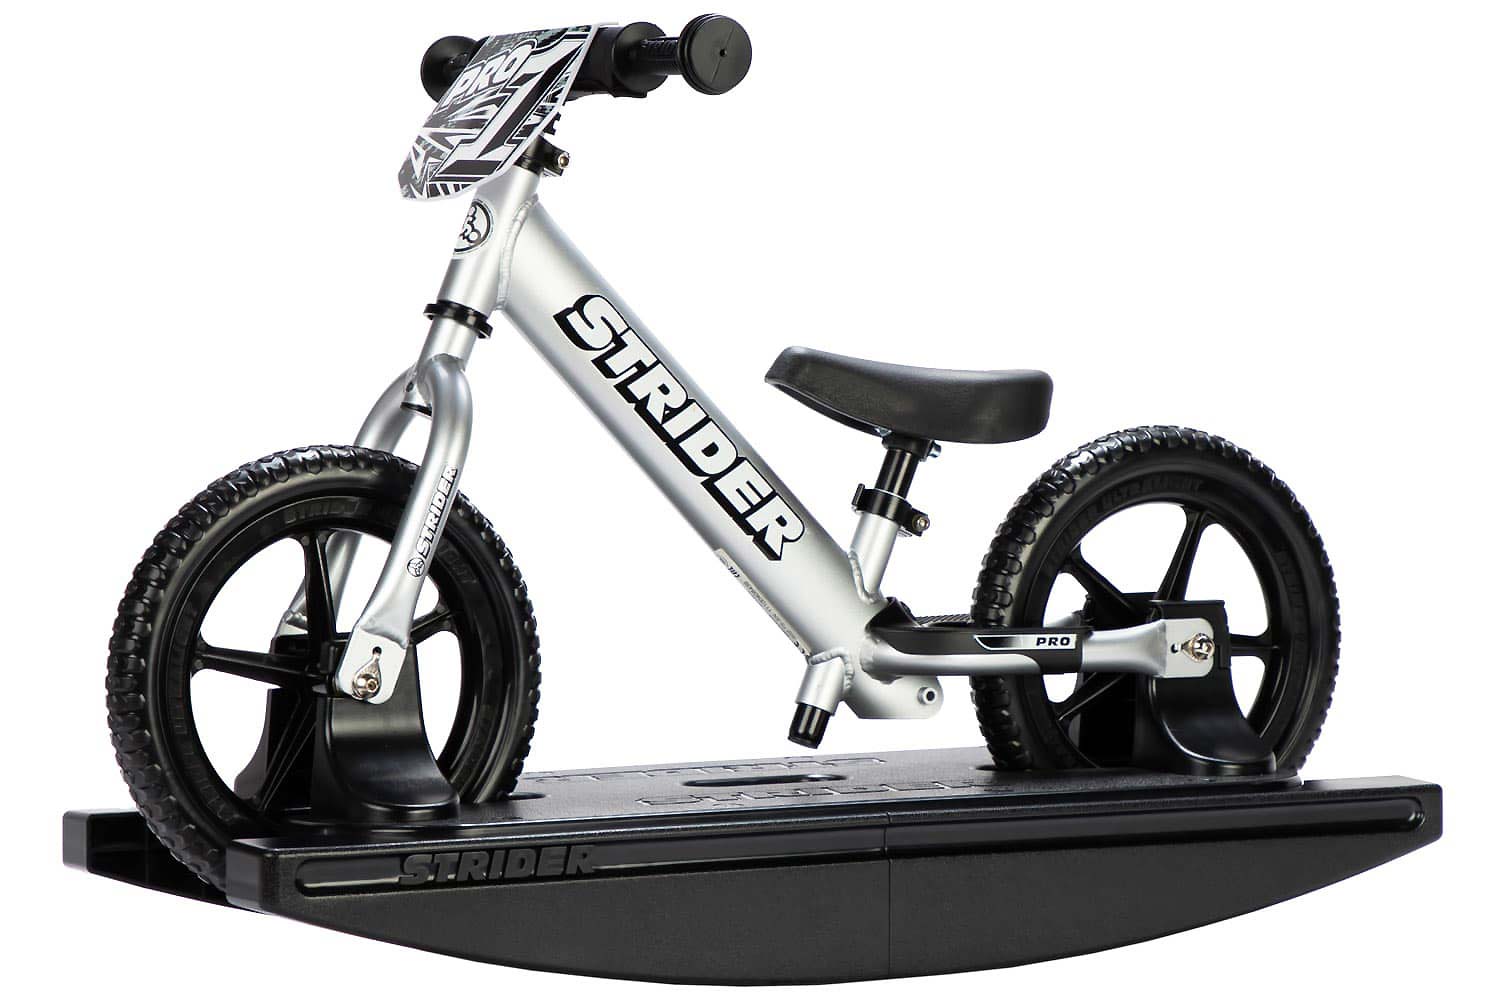 Strider Pro 2-in-1 Rocking Bike - Rock and Ride Toy - Free Shipping